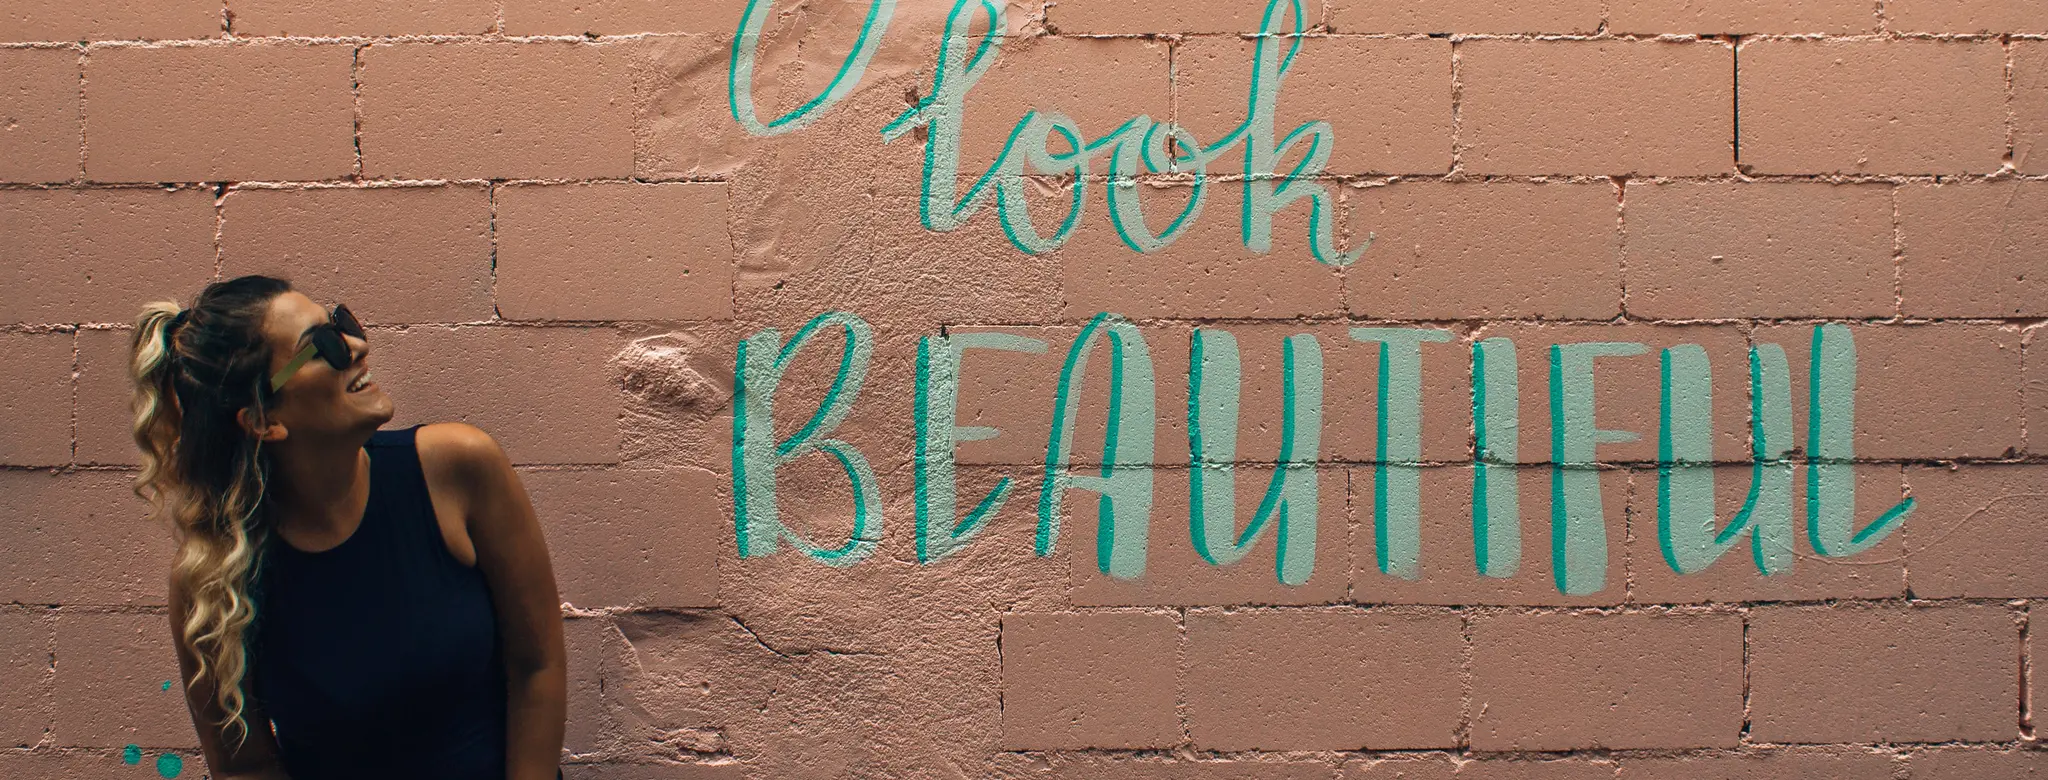 Woman leaning on a painted brick wall with a "You look beautiful" mural